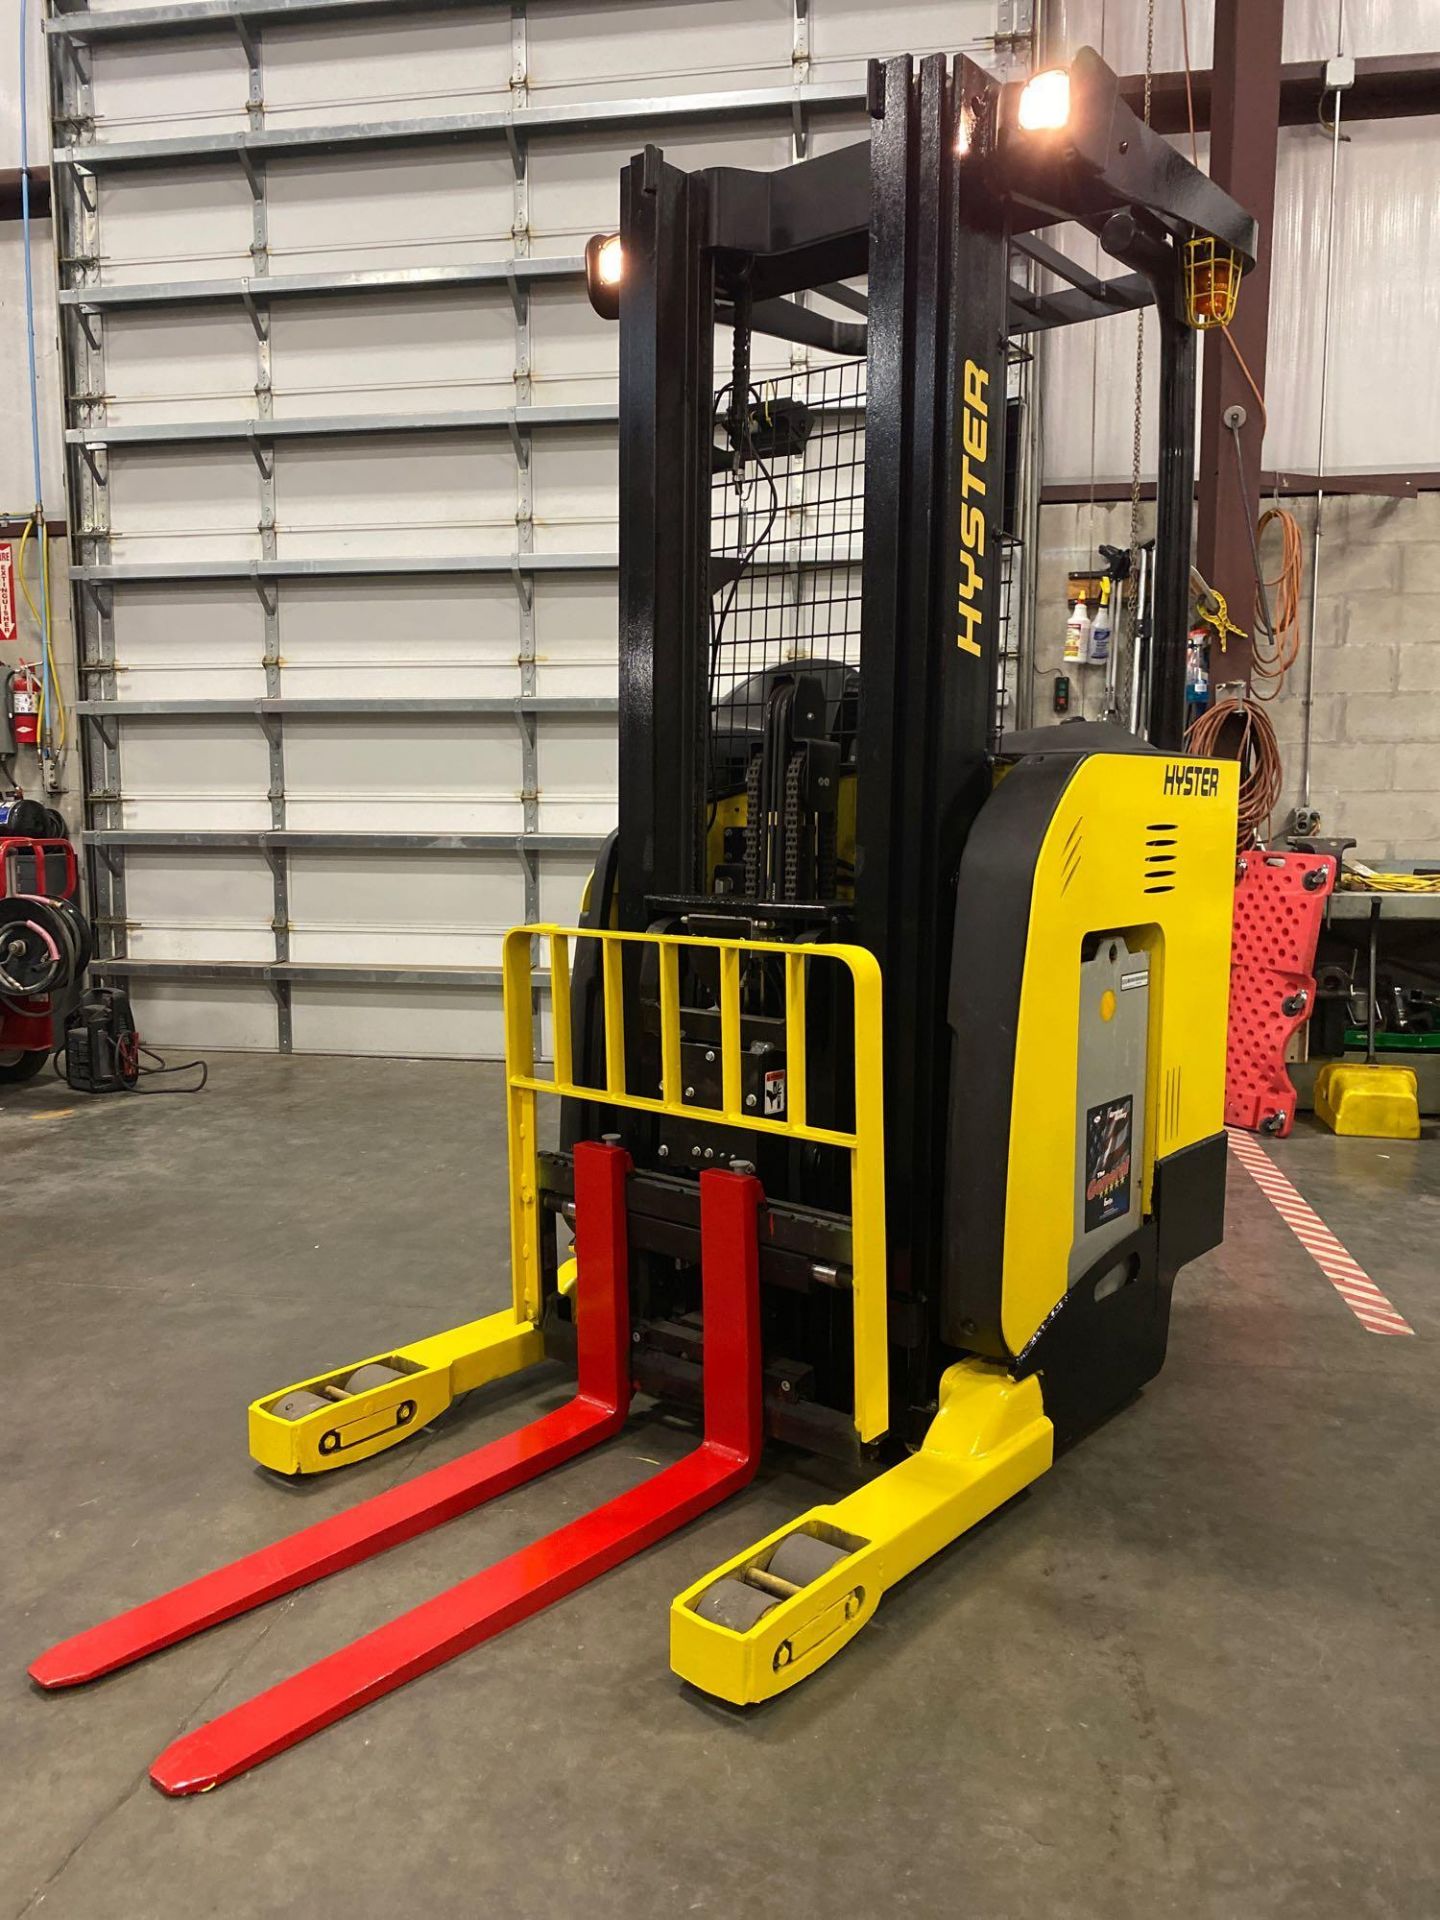 2011 HYSTER N35ZR-14.5 ELECTRIC REACH TRUCK, 3,500 LB CAPACITY, 36V, 212" HEIGHT CAP, ADJUSTABLE BAC - Image 3 of 9